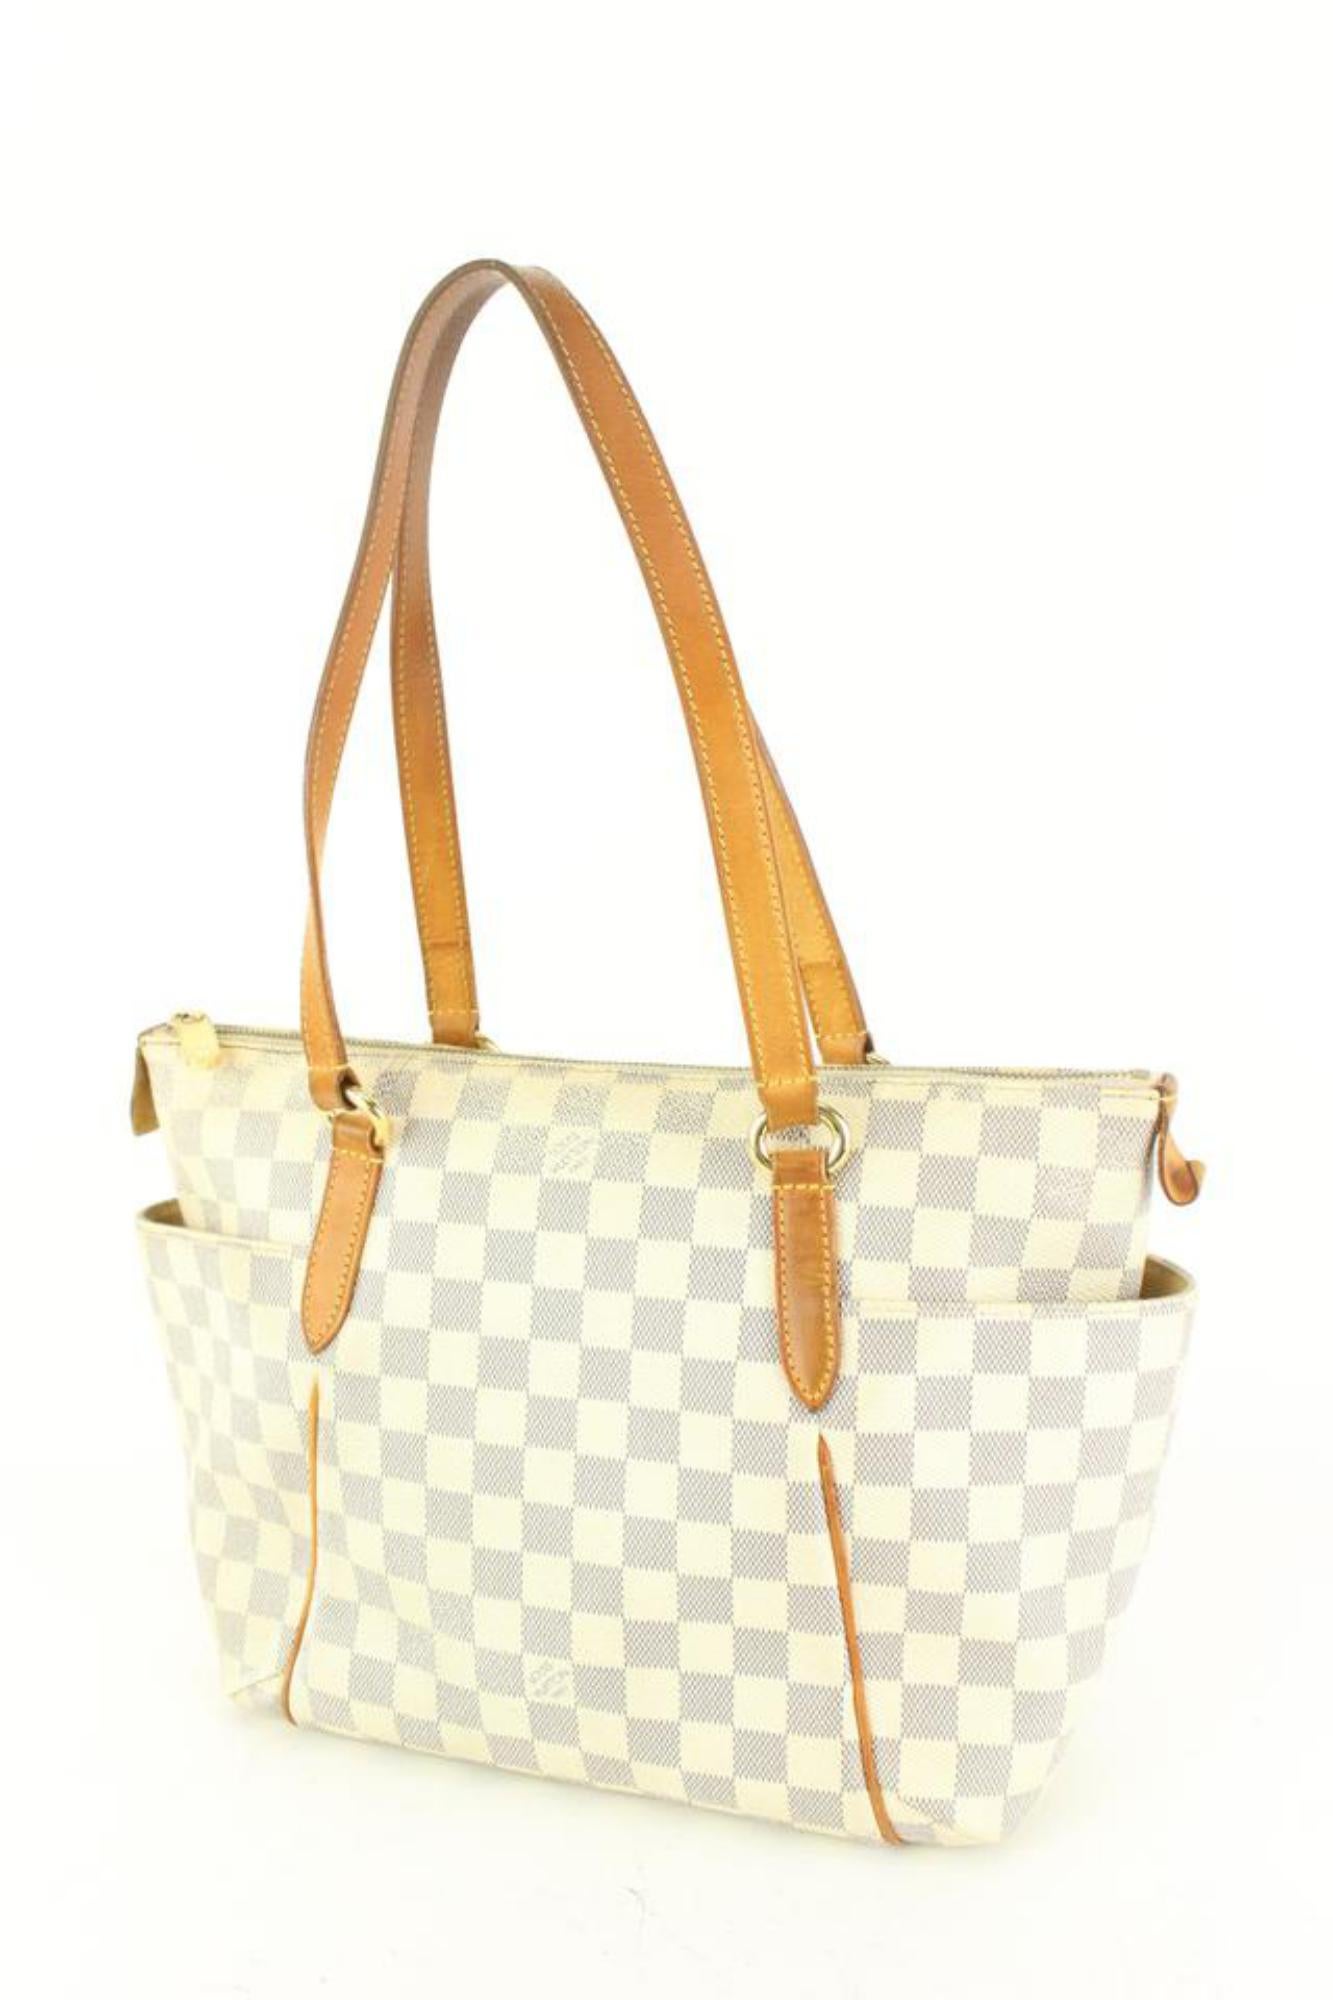 Louis Vuitton Damier Azur Totally PM Tote Bag 83lk67s For Sale 4